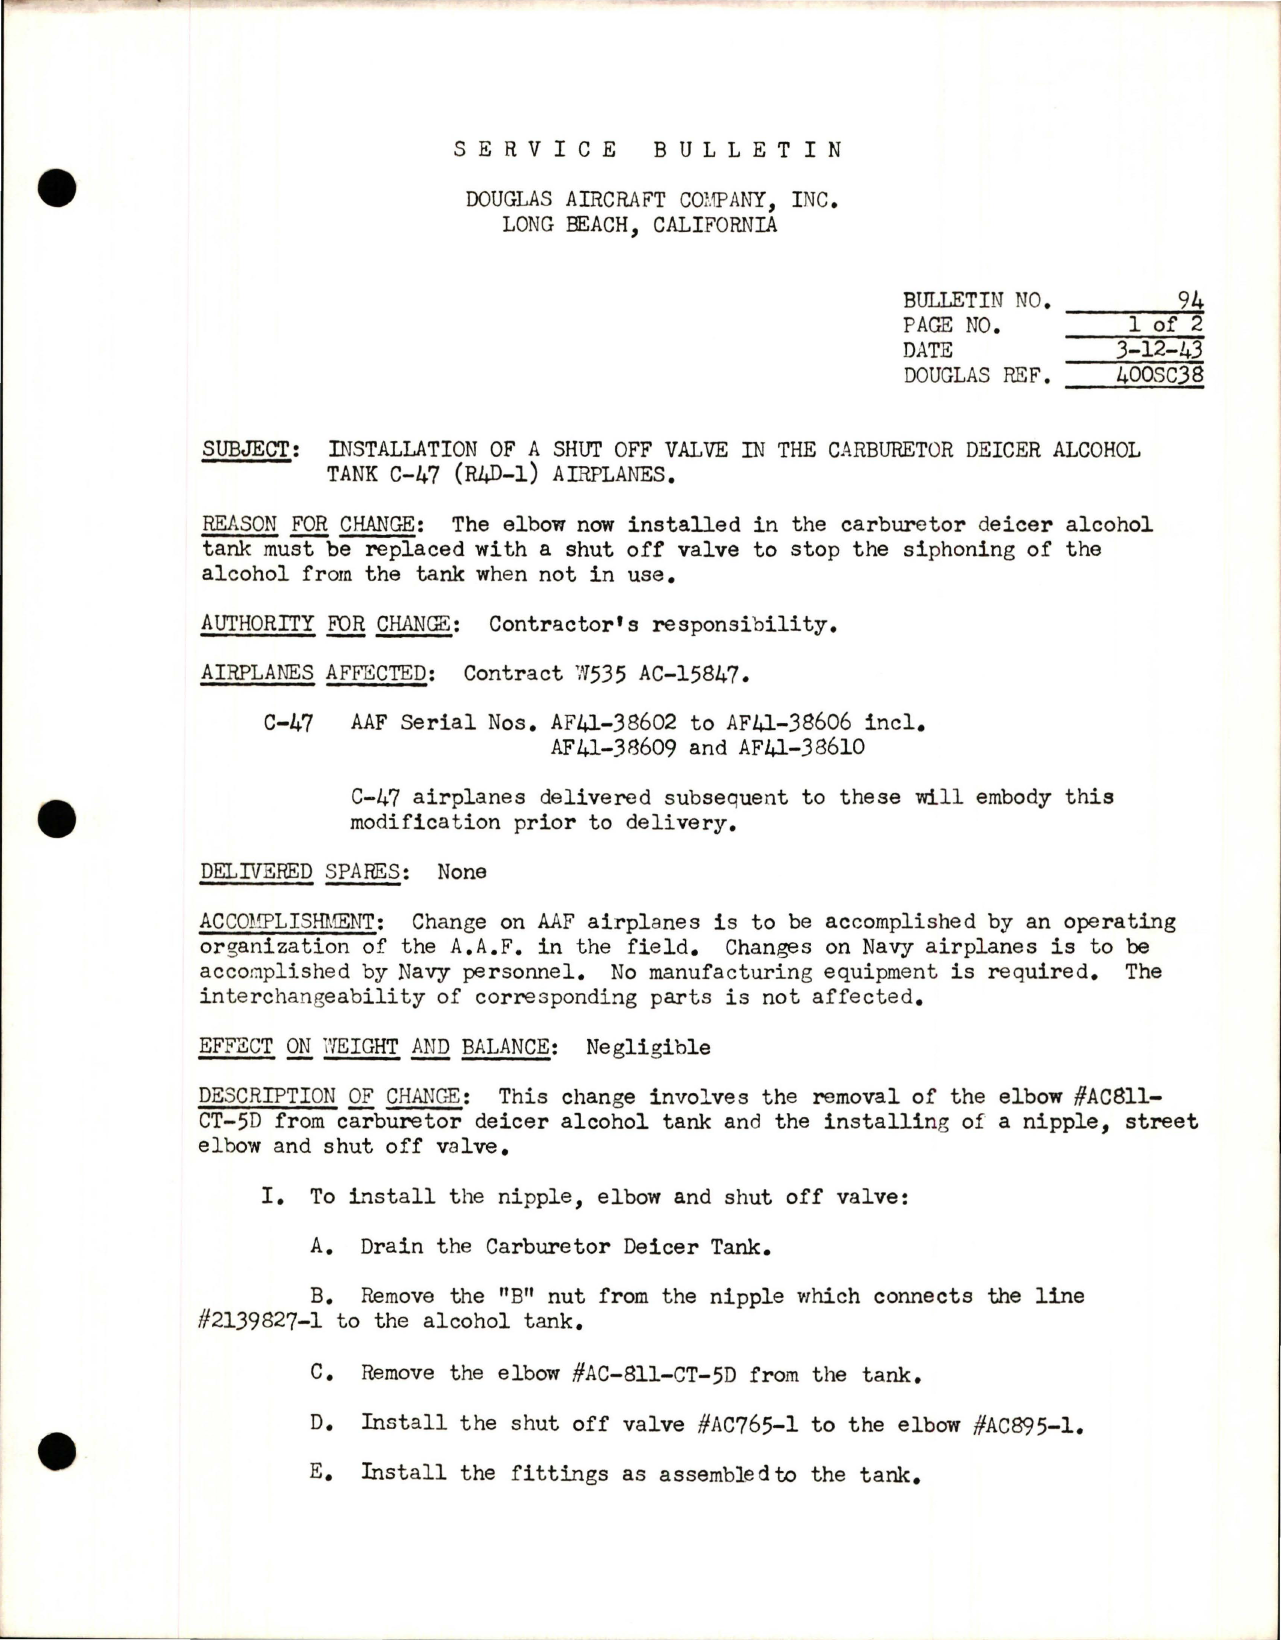 Sample page 1 from AirCorps Library document: Installation of a Shut Off Valve in the Carburetor Deicer Alcohol Tank